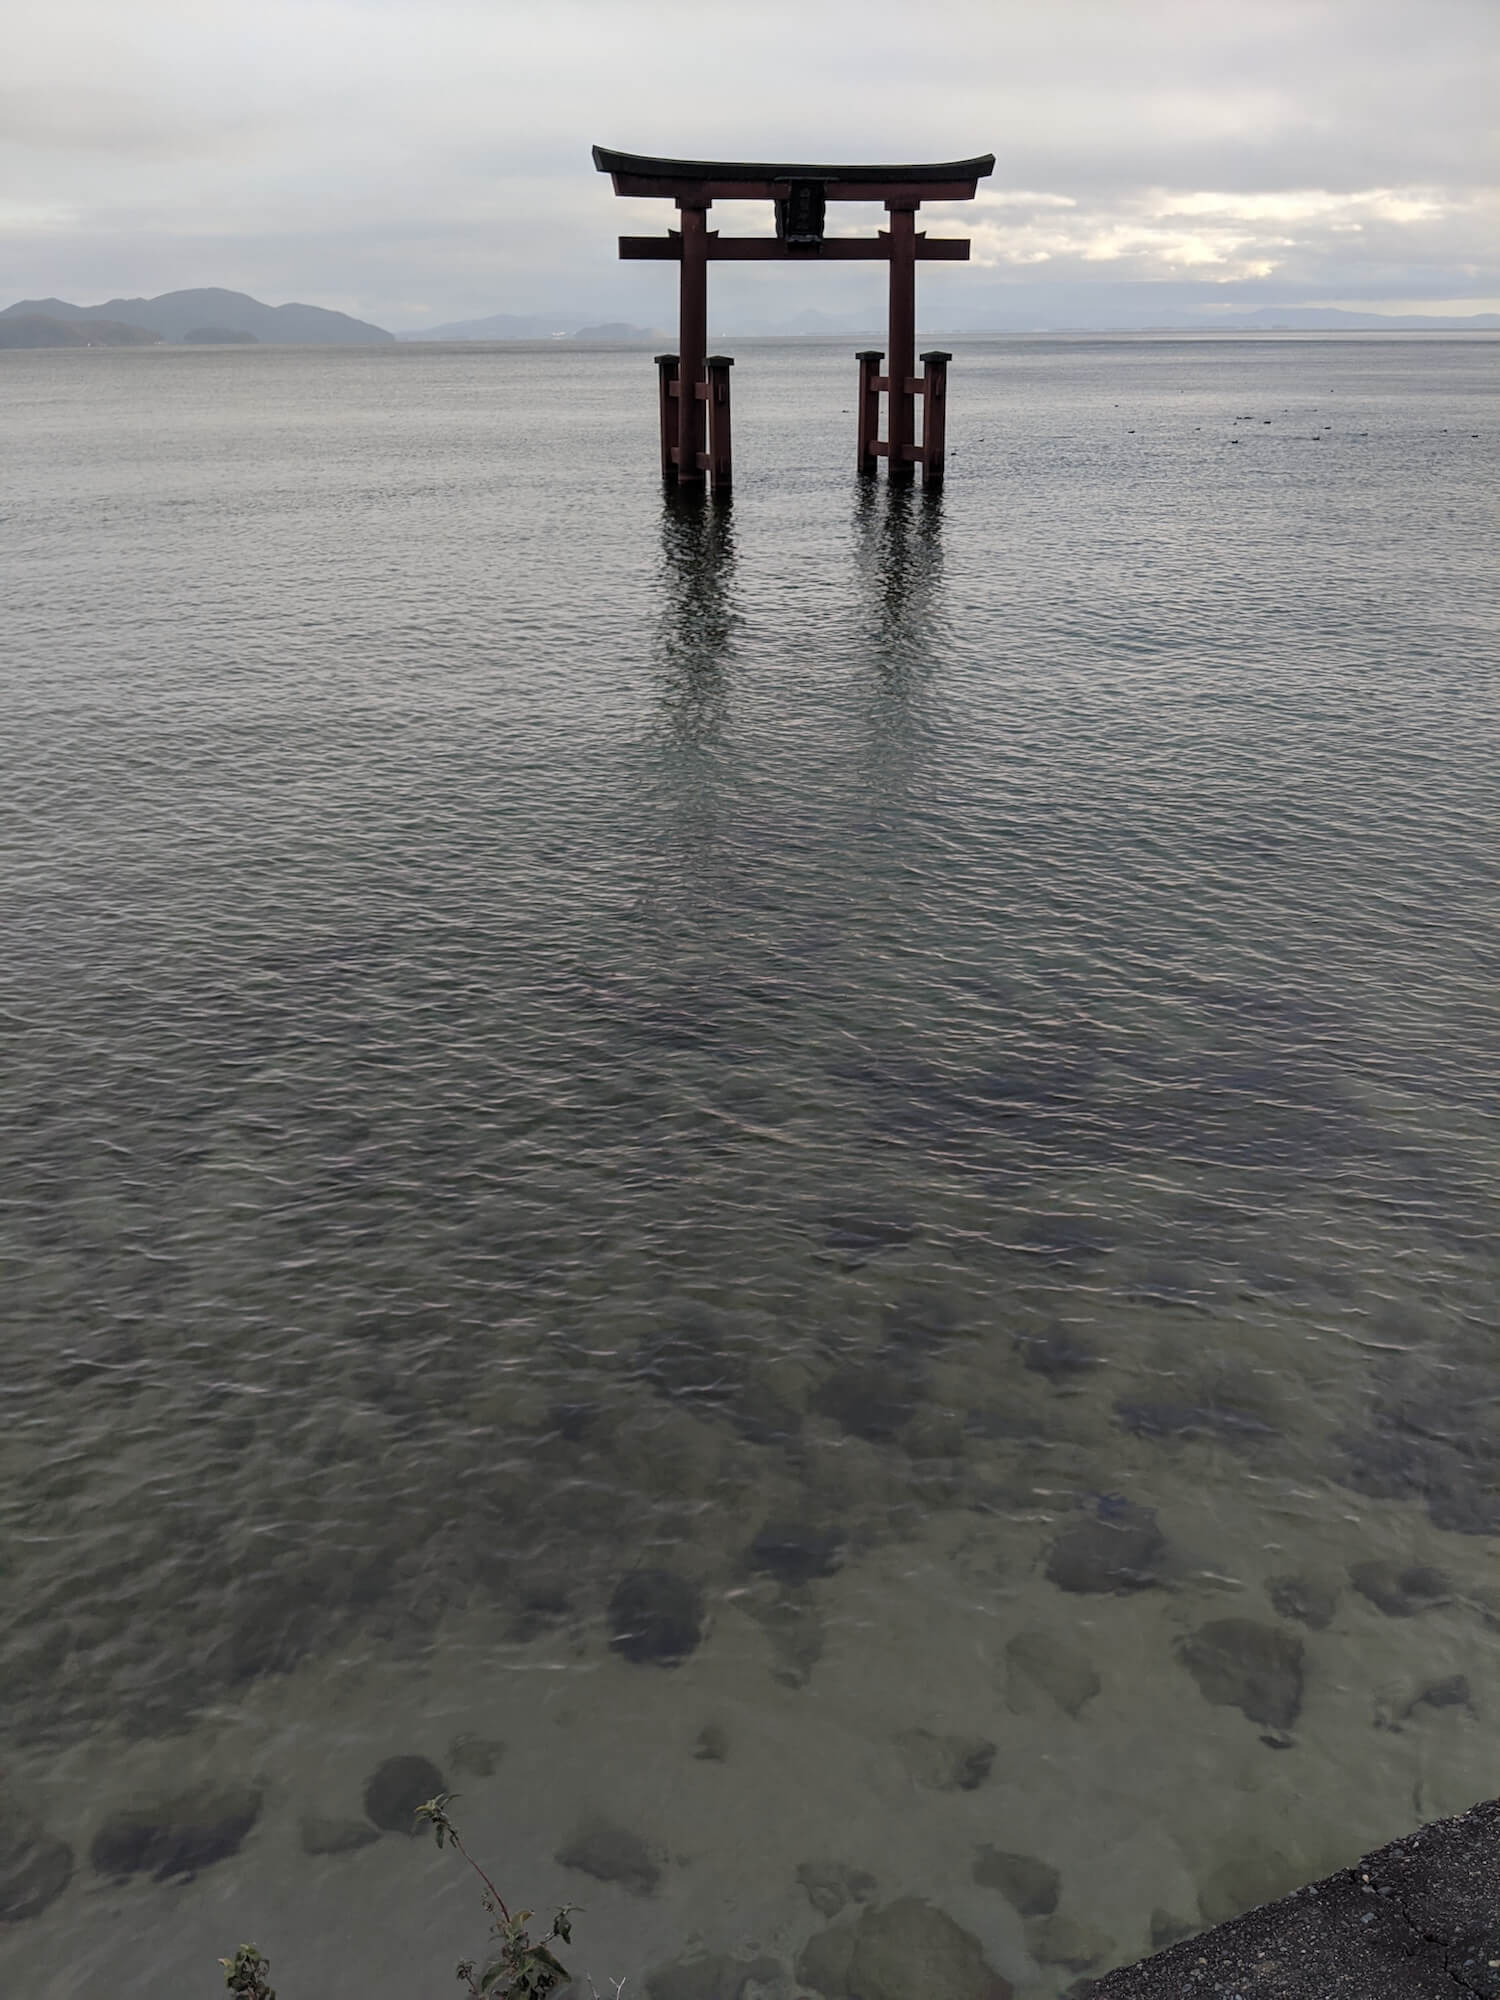 Torii gate is one of the top attractions at Lake Biwa, Shiga